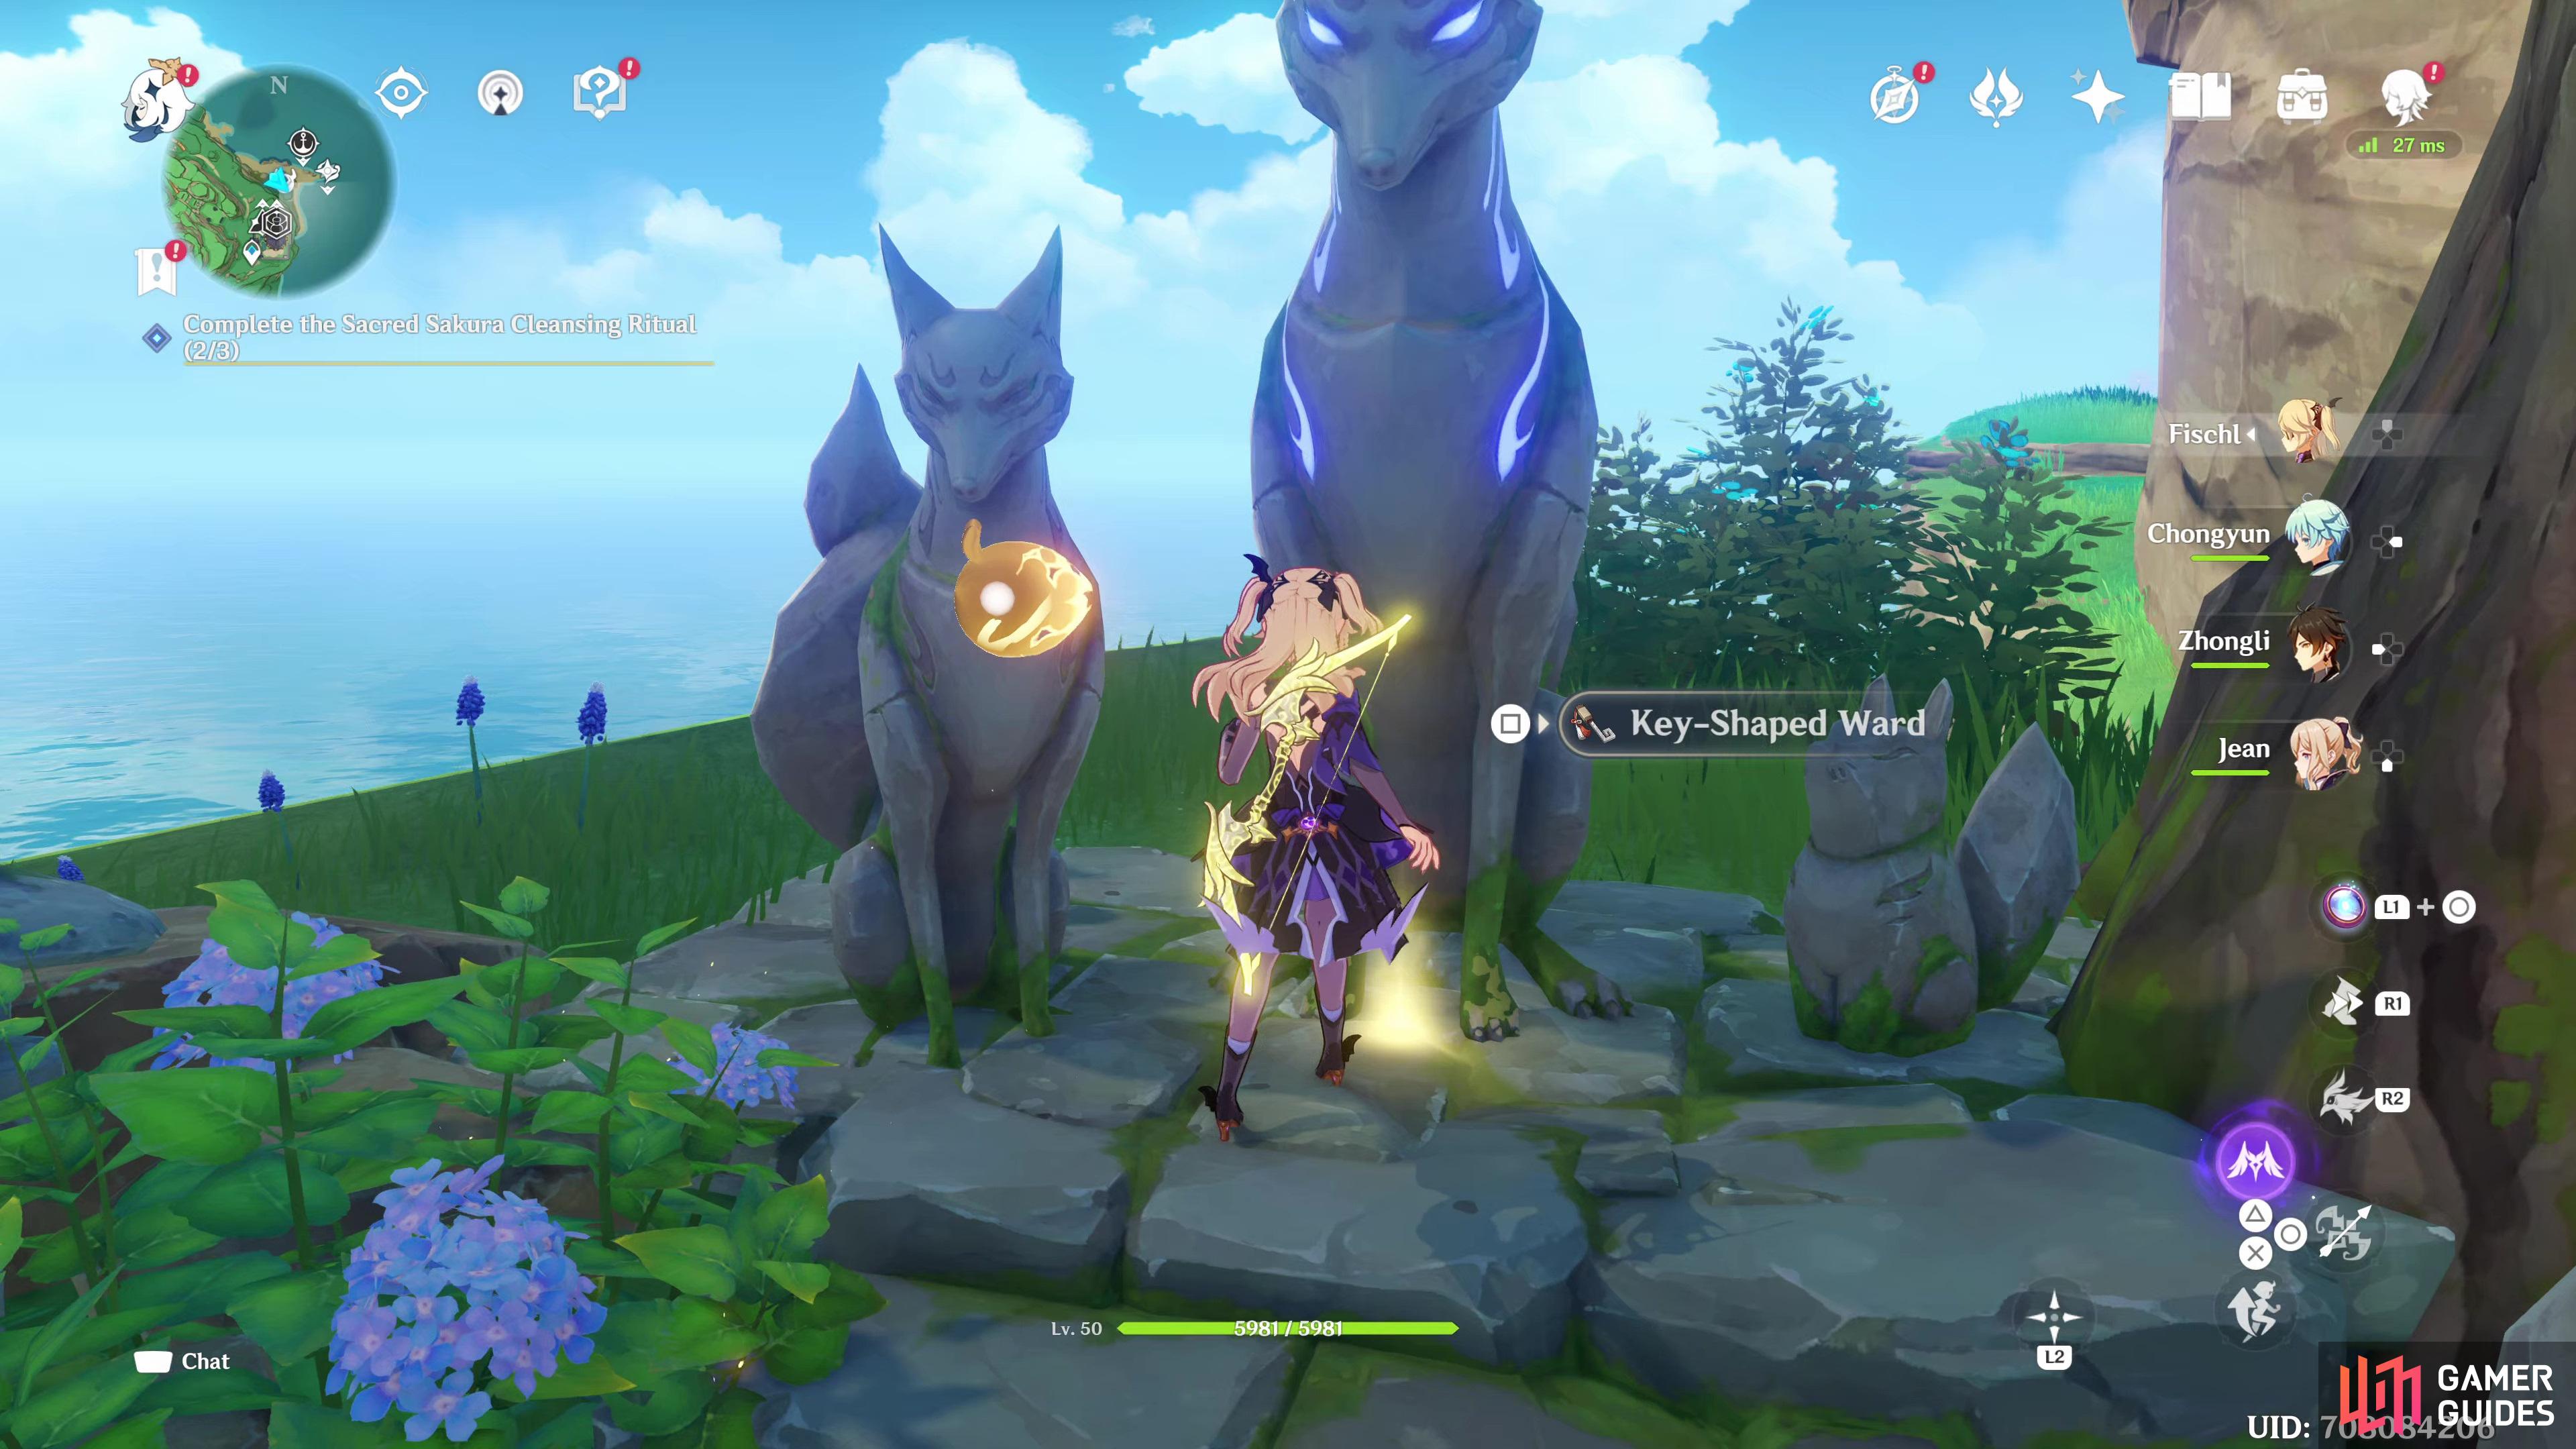 Shoot the Kitsune Statue with an electro character and collect the Ward. 